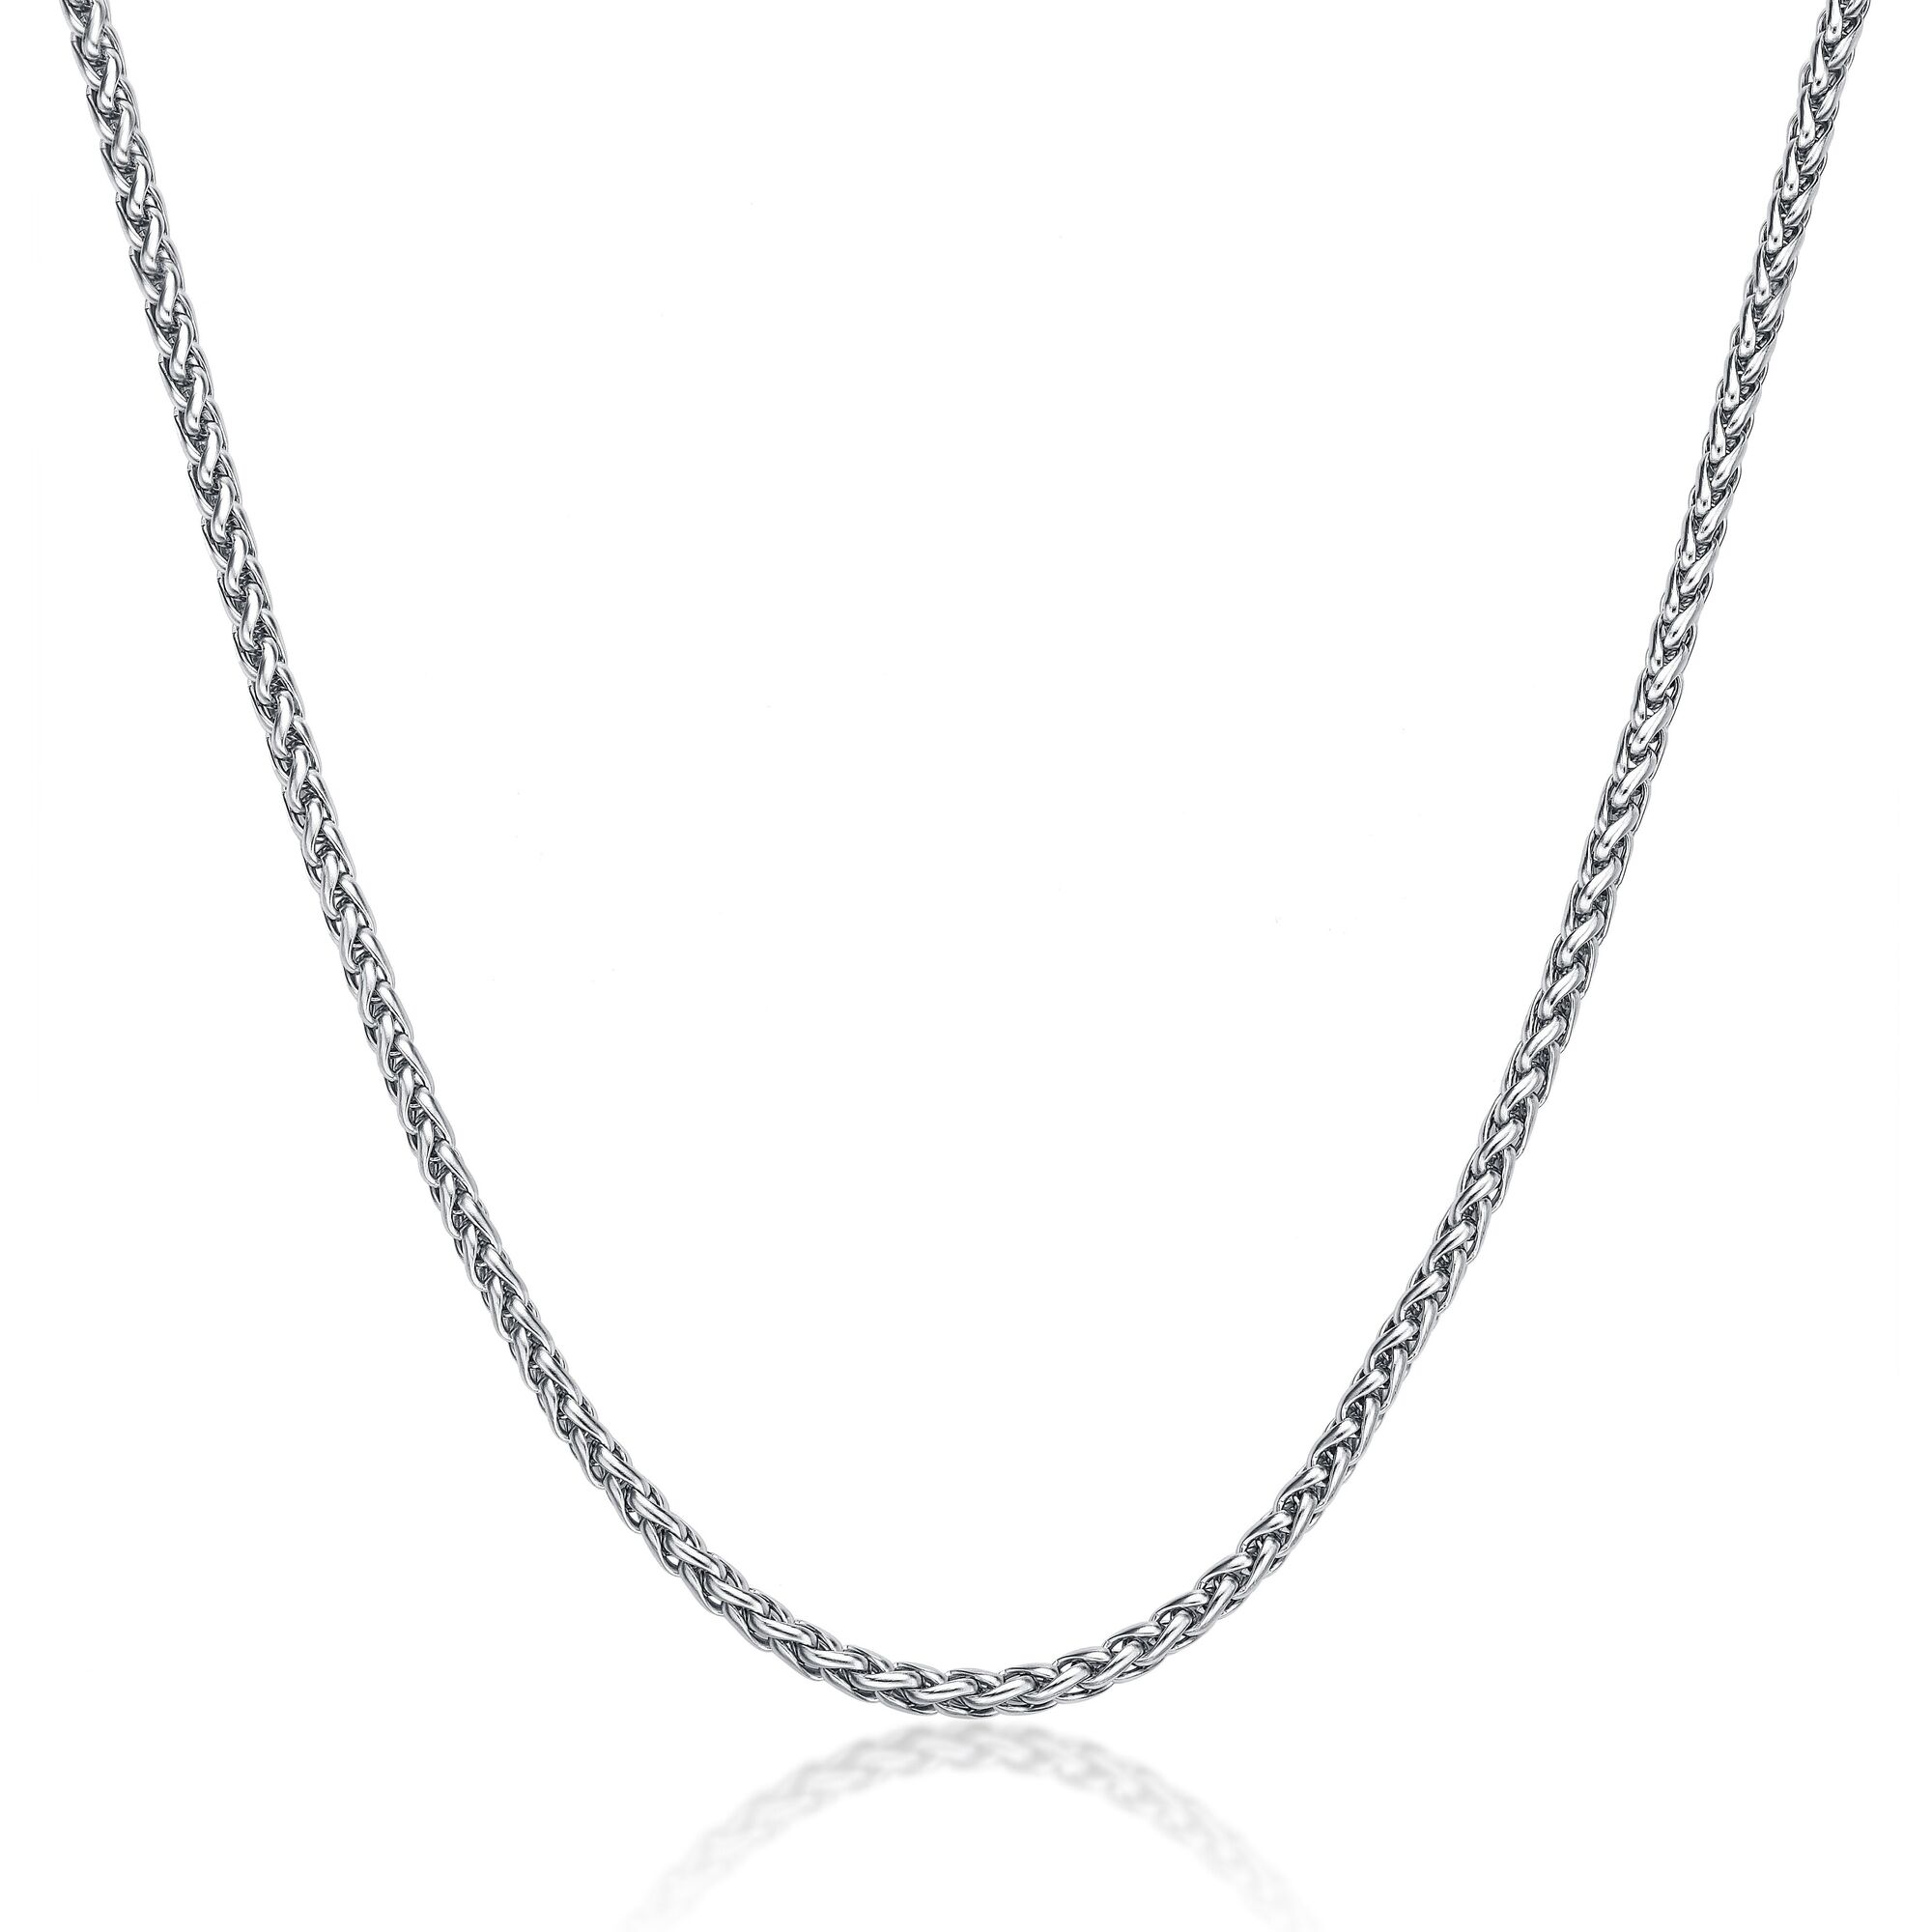 Men's Stainless Steel 3MM Wheat Chain Necklace - 24 Inch | Metro Jewelry